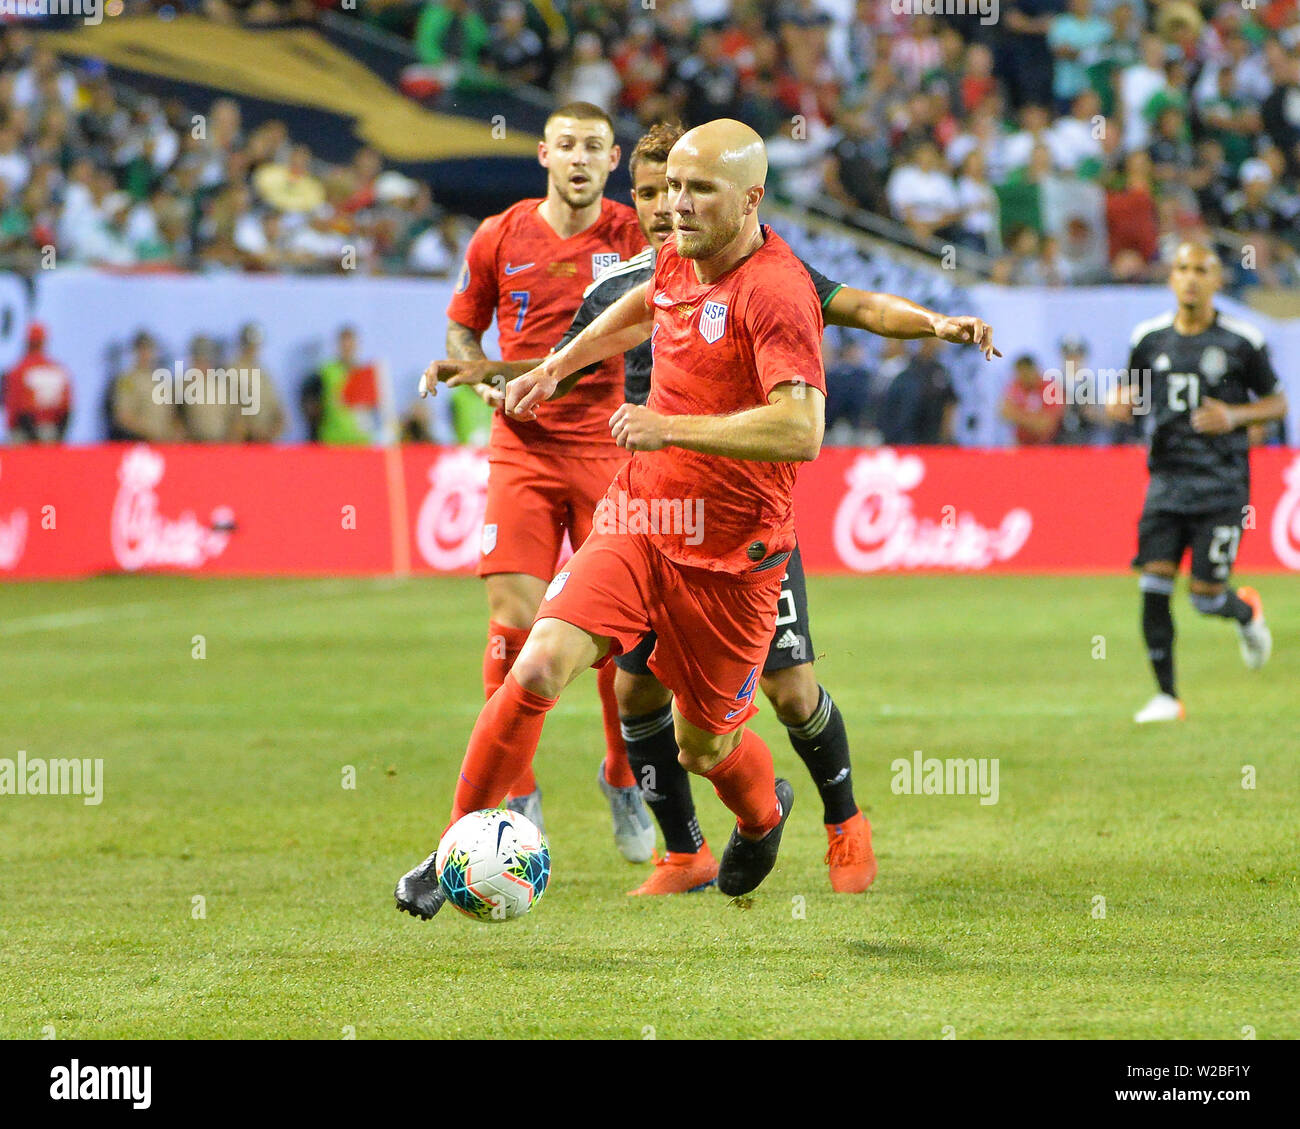 Chicago, IL, USA. 07th July, 2019. US midfielder, Michael Bradley (4), moves the ball downfield during the 2019 CONCACAF Gold Cup, championship match, between the United States and Mexico, at Soldier Field in Chicago, IL. Credit: Kevin Langley/CSM/Alamy Live News Stock Photo